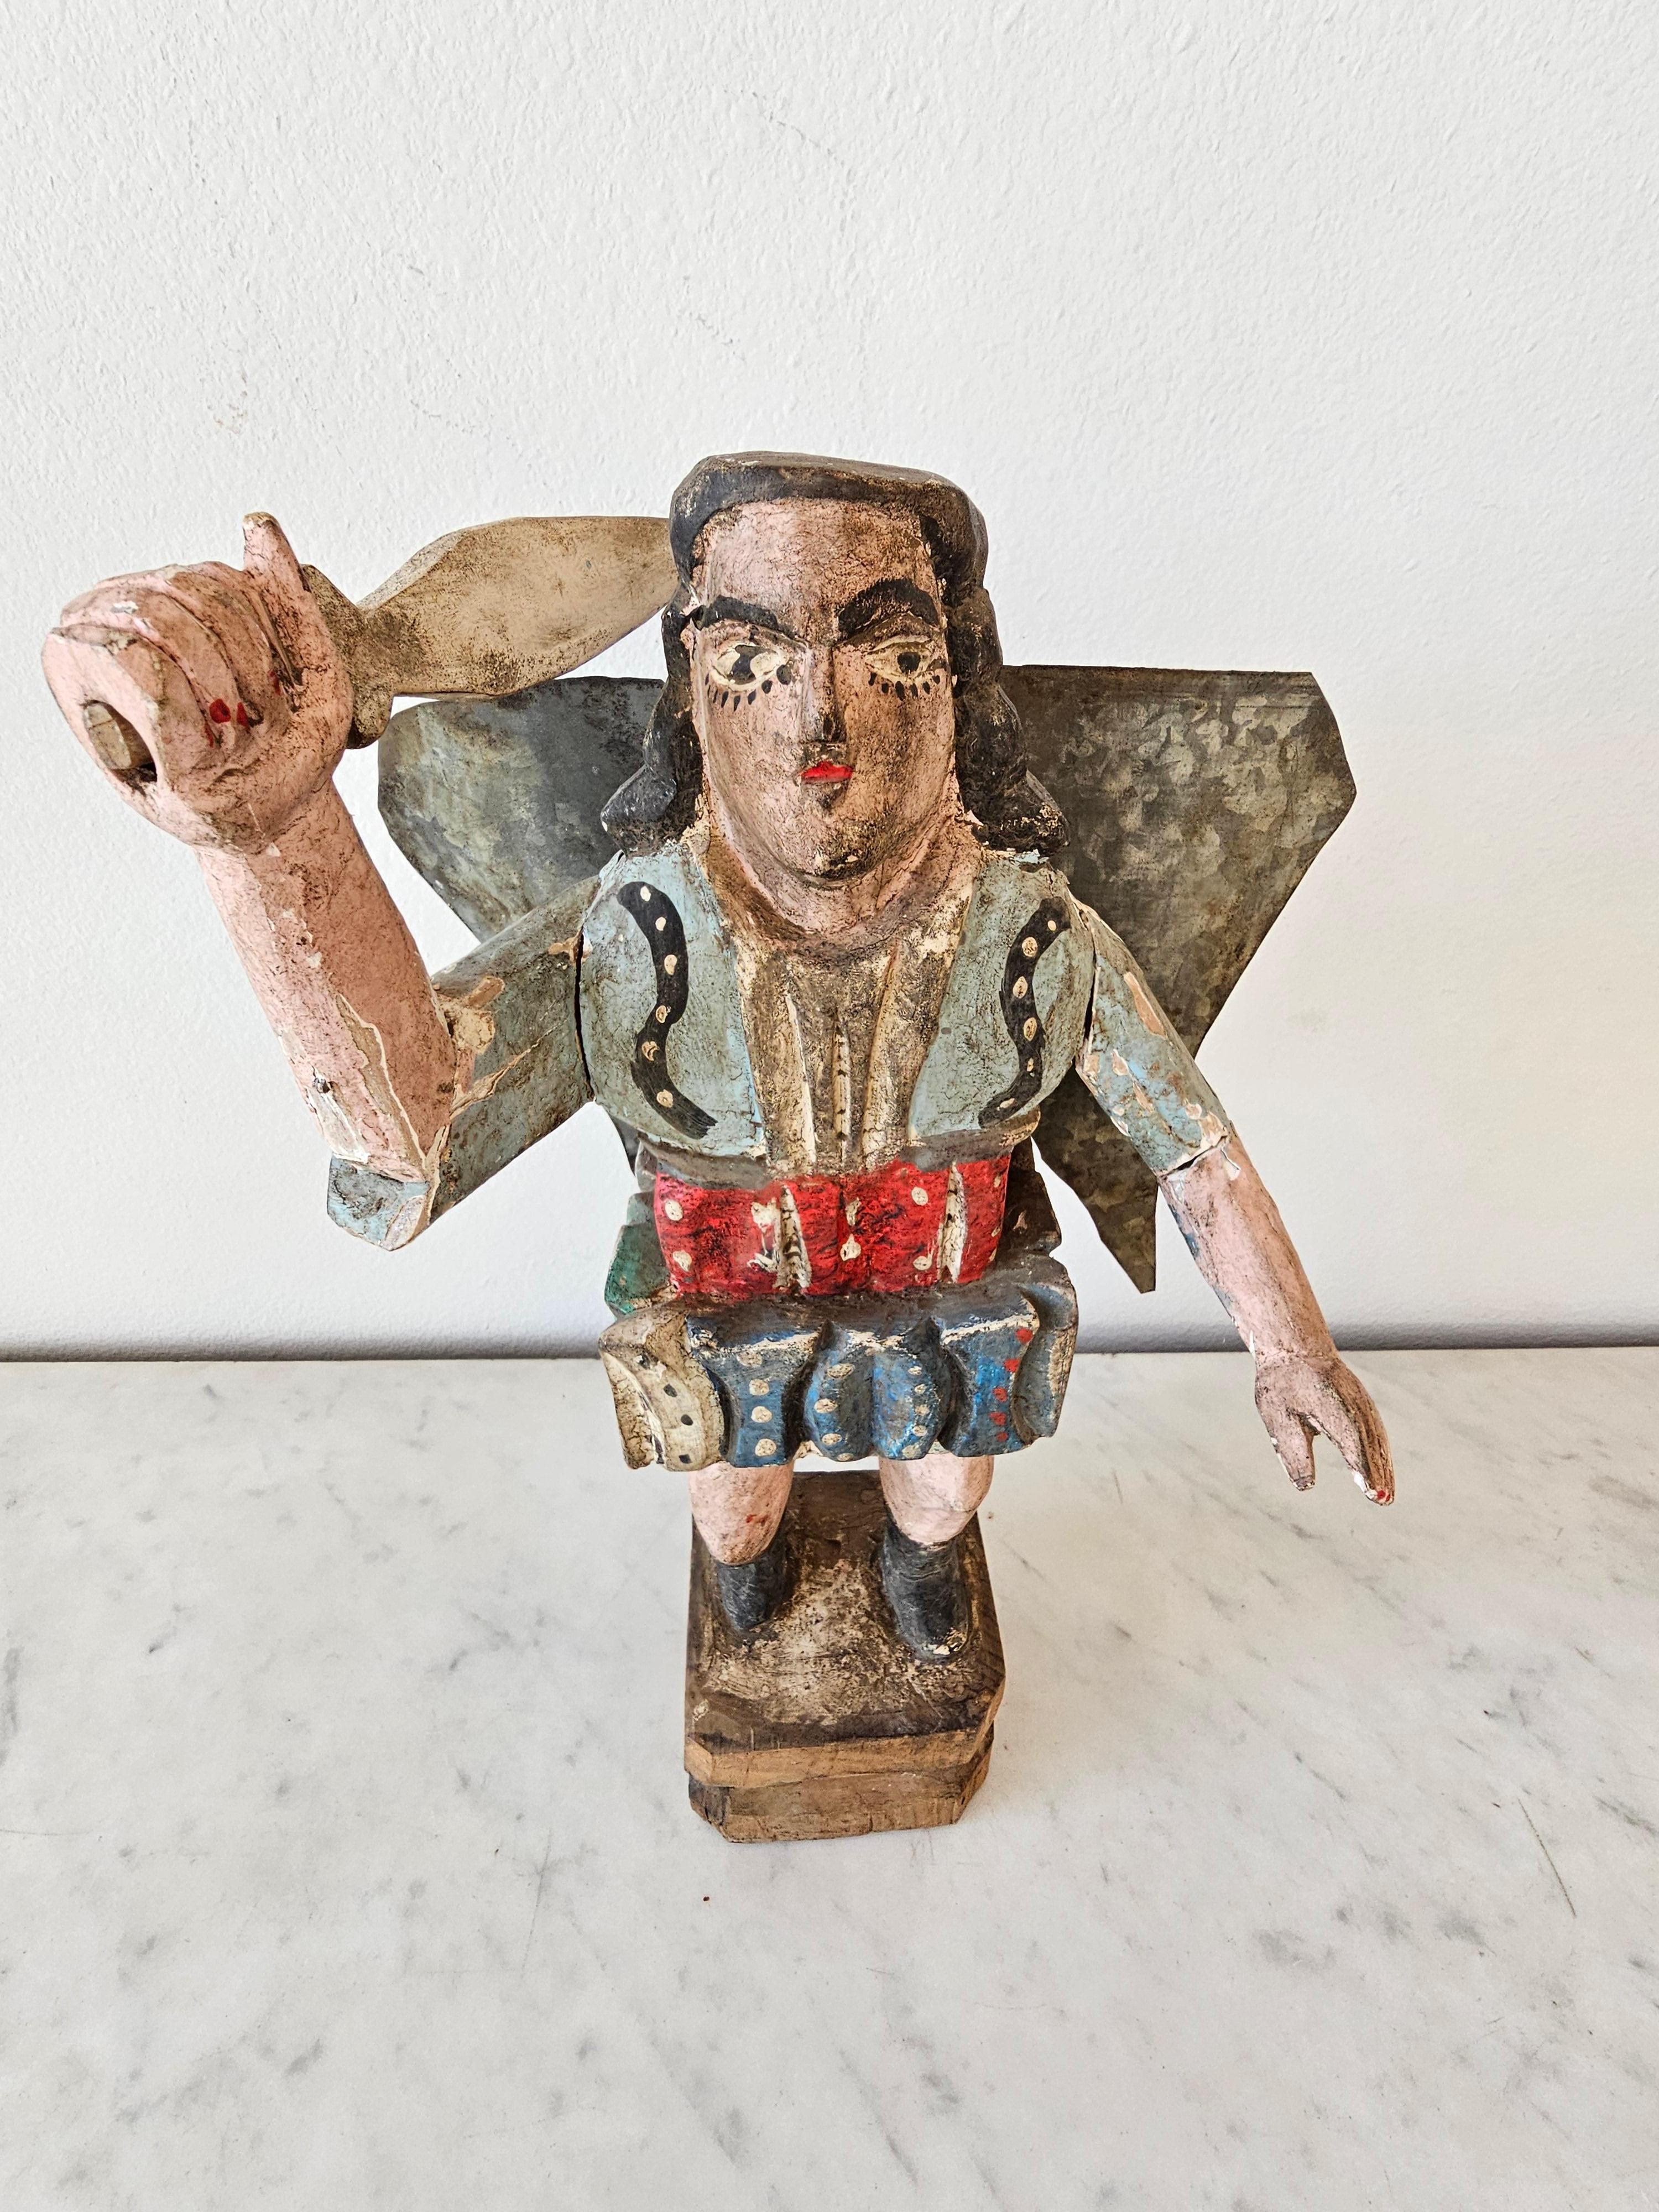 A large vintage Spanish Colonial style Mexican religious folk art carved wood santo figure - bulto carving.

Mid-20th century, Mexico, primitive hand-crafted construction, one-of-a-kind, likely depicting San Miguel Arcángel (Saint Michael the